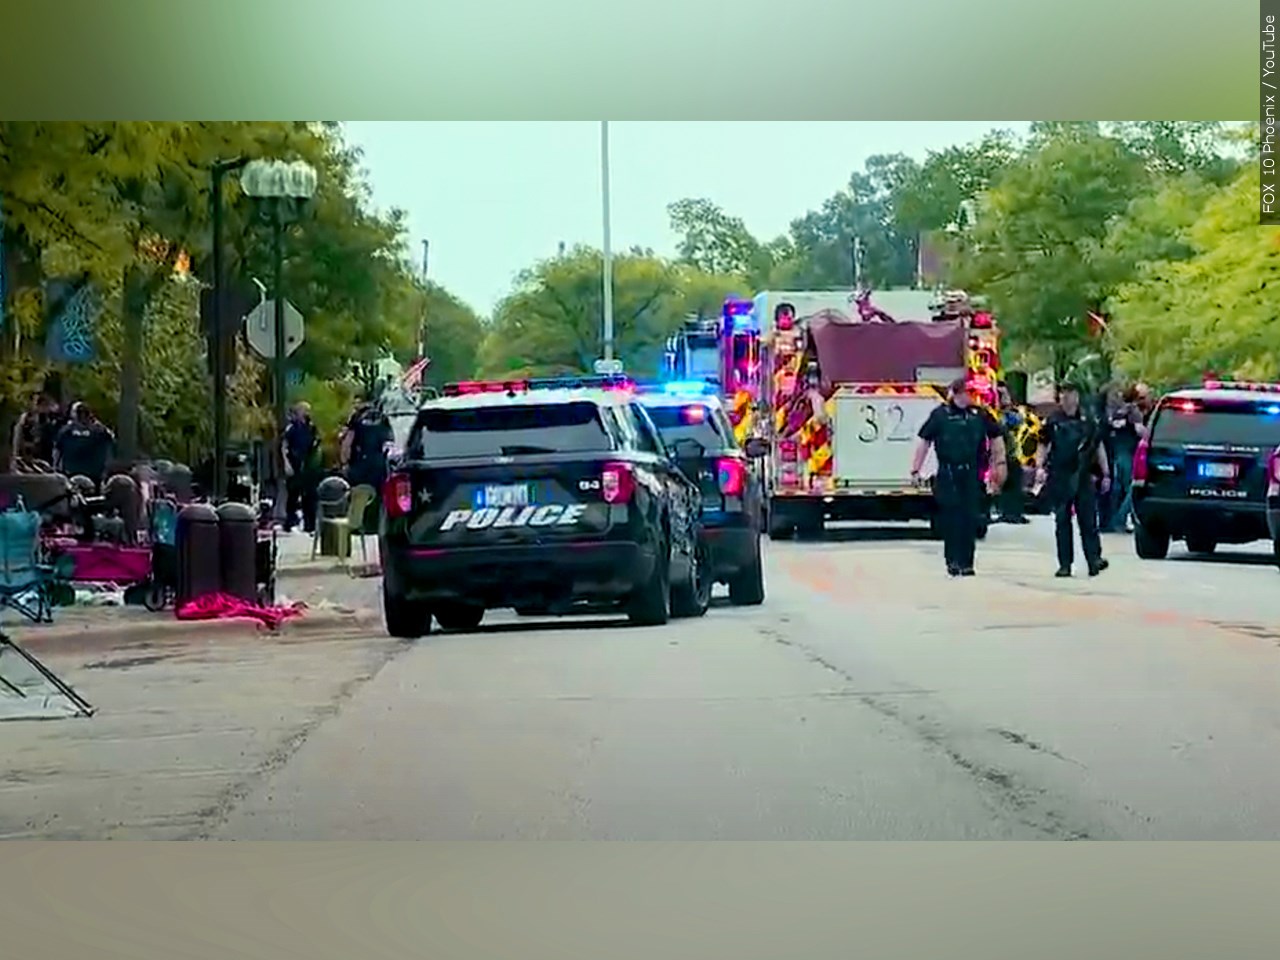 Law enforcement on the scene of a shooting that occurred at a 4th of July parade in Highland Park, Illinois.